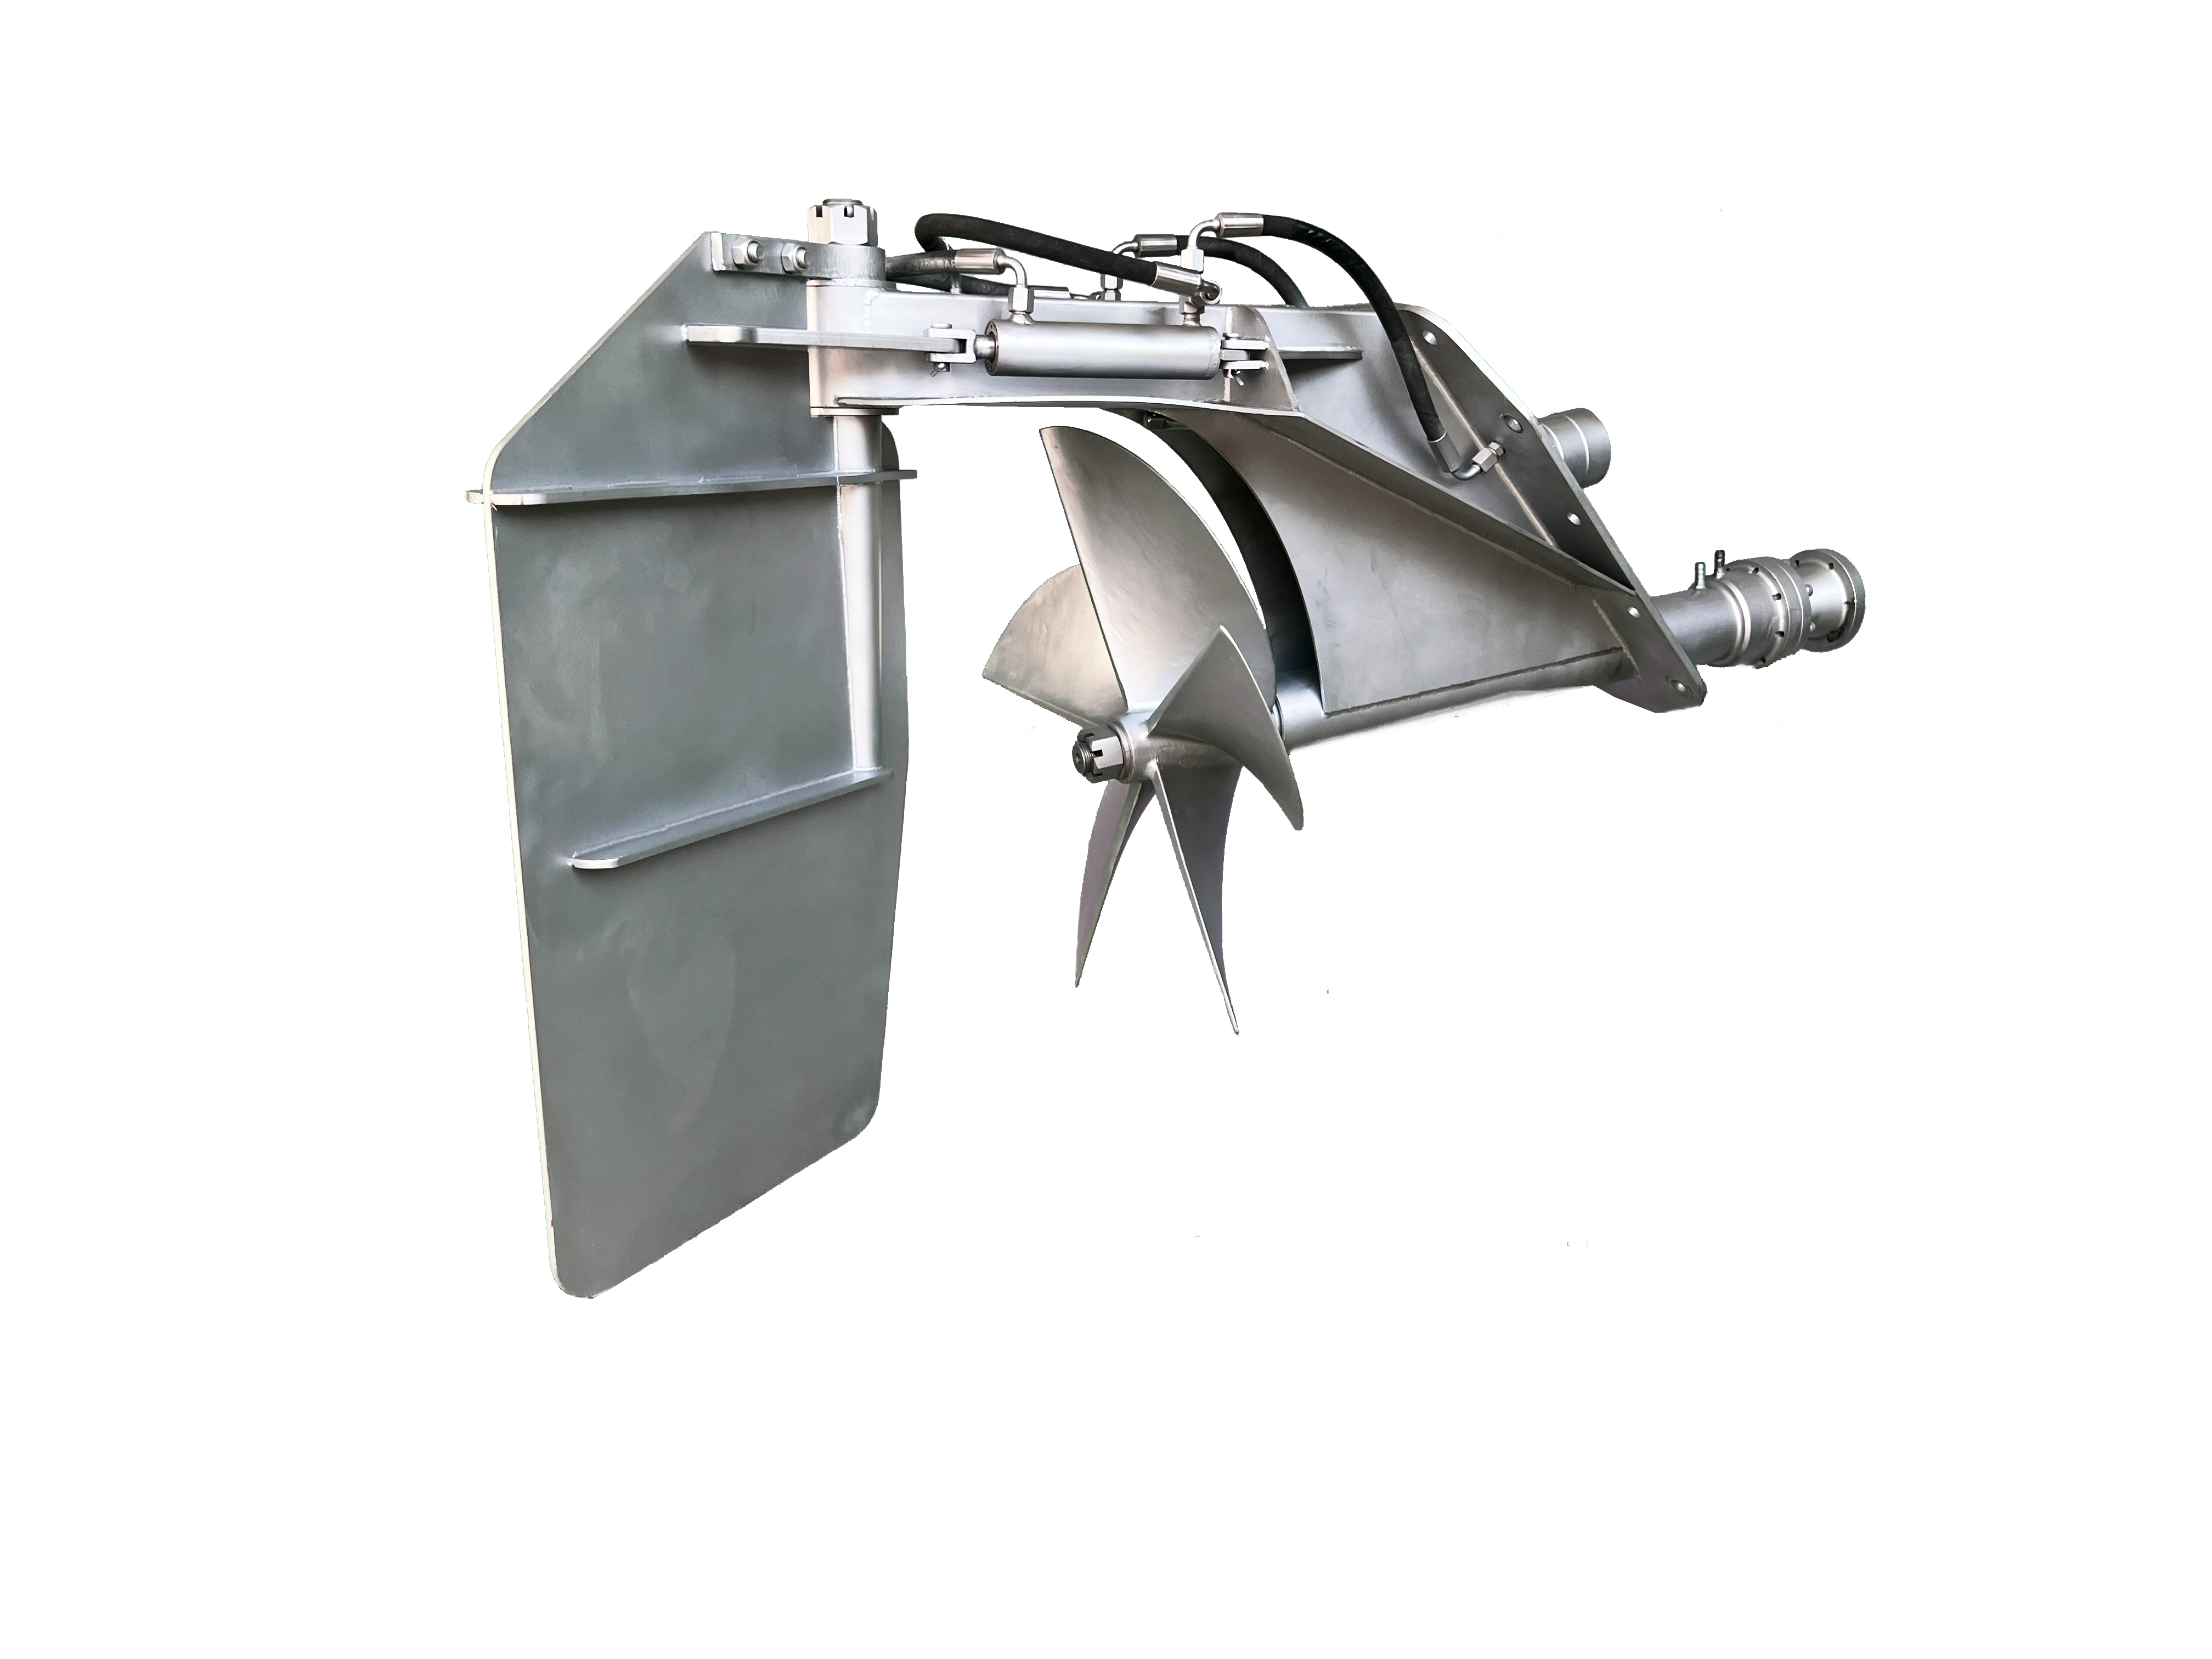 BG550 TSD Ship Propeller System With Boat Inboard Diesel Engine in Reasonable Price